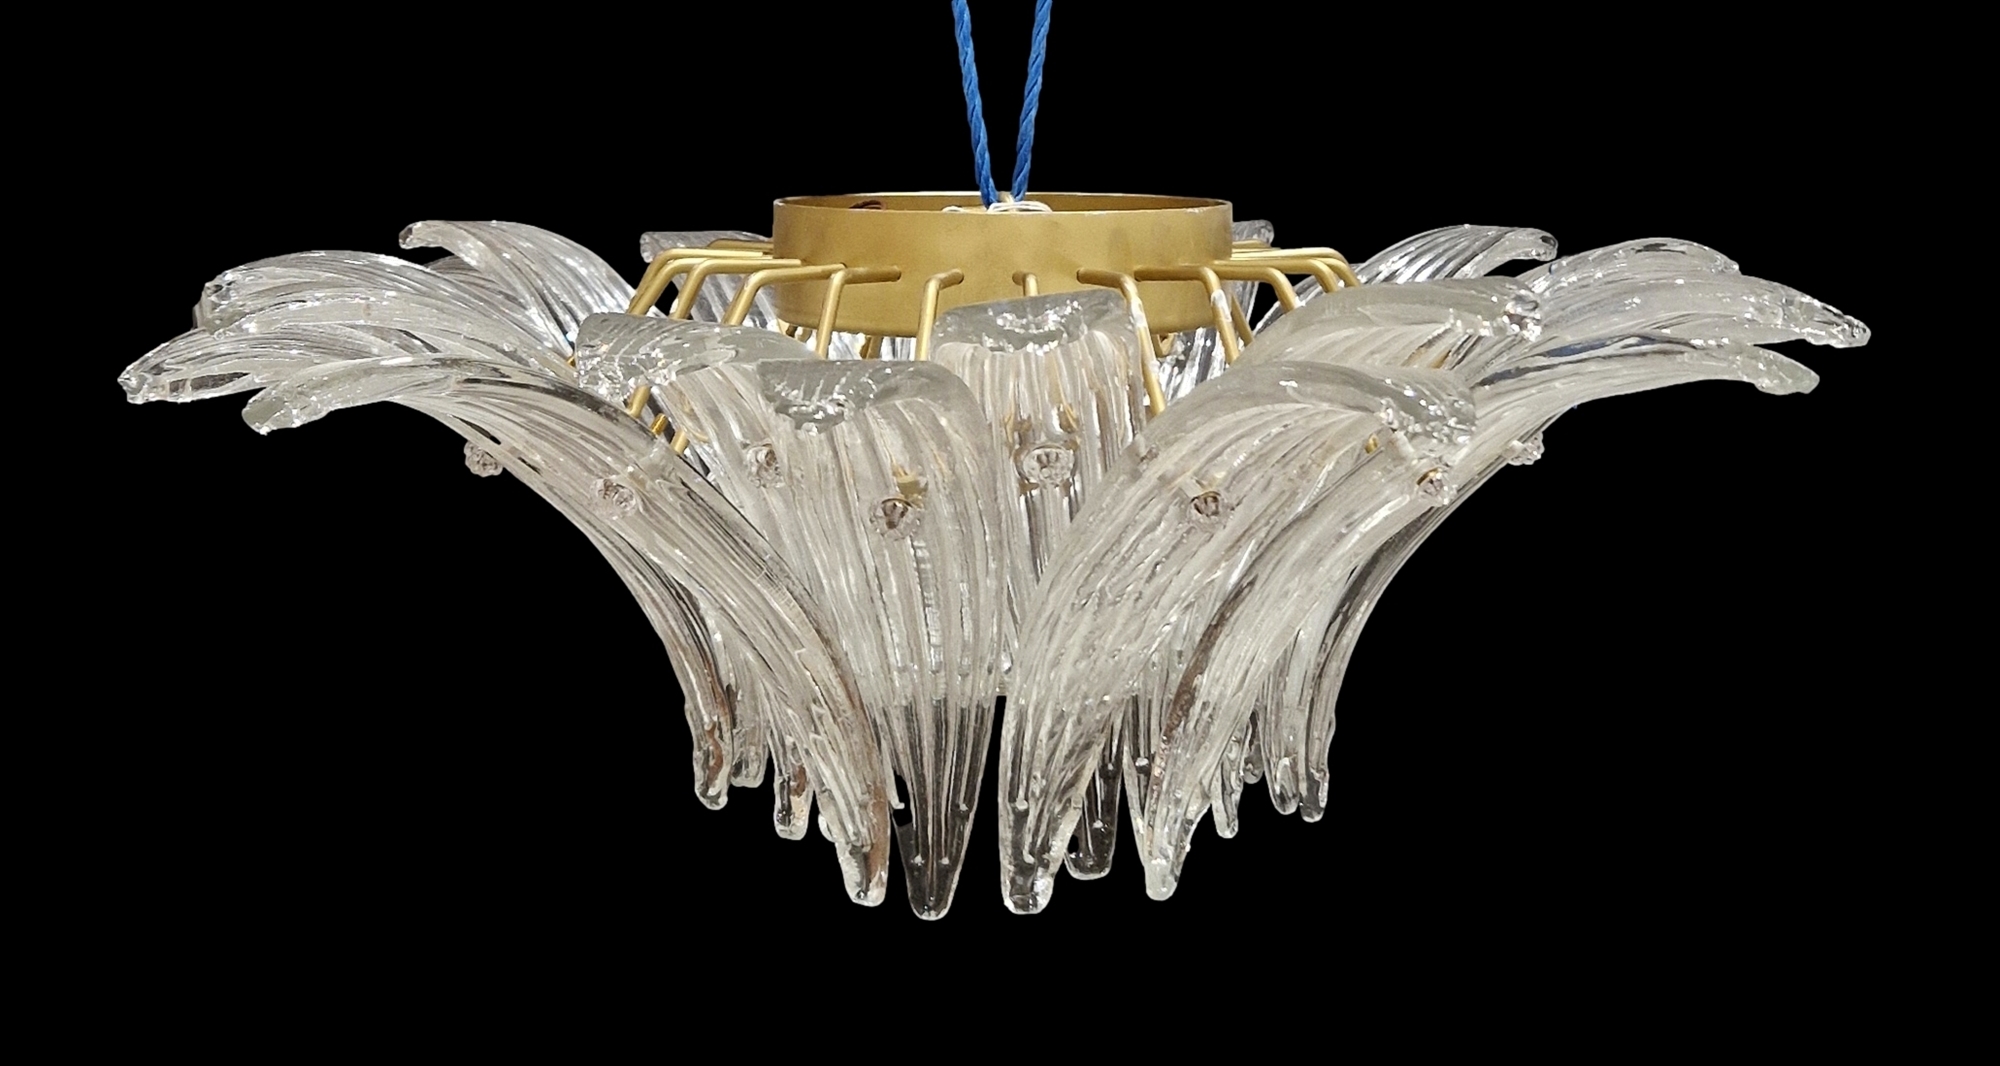 Barovier & Toso Murano glass 'Palmette' suspension lamp/electrolier, 5310 series, in the form of